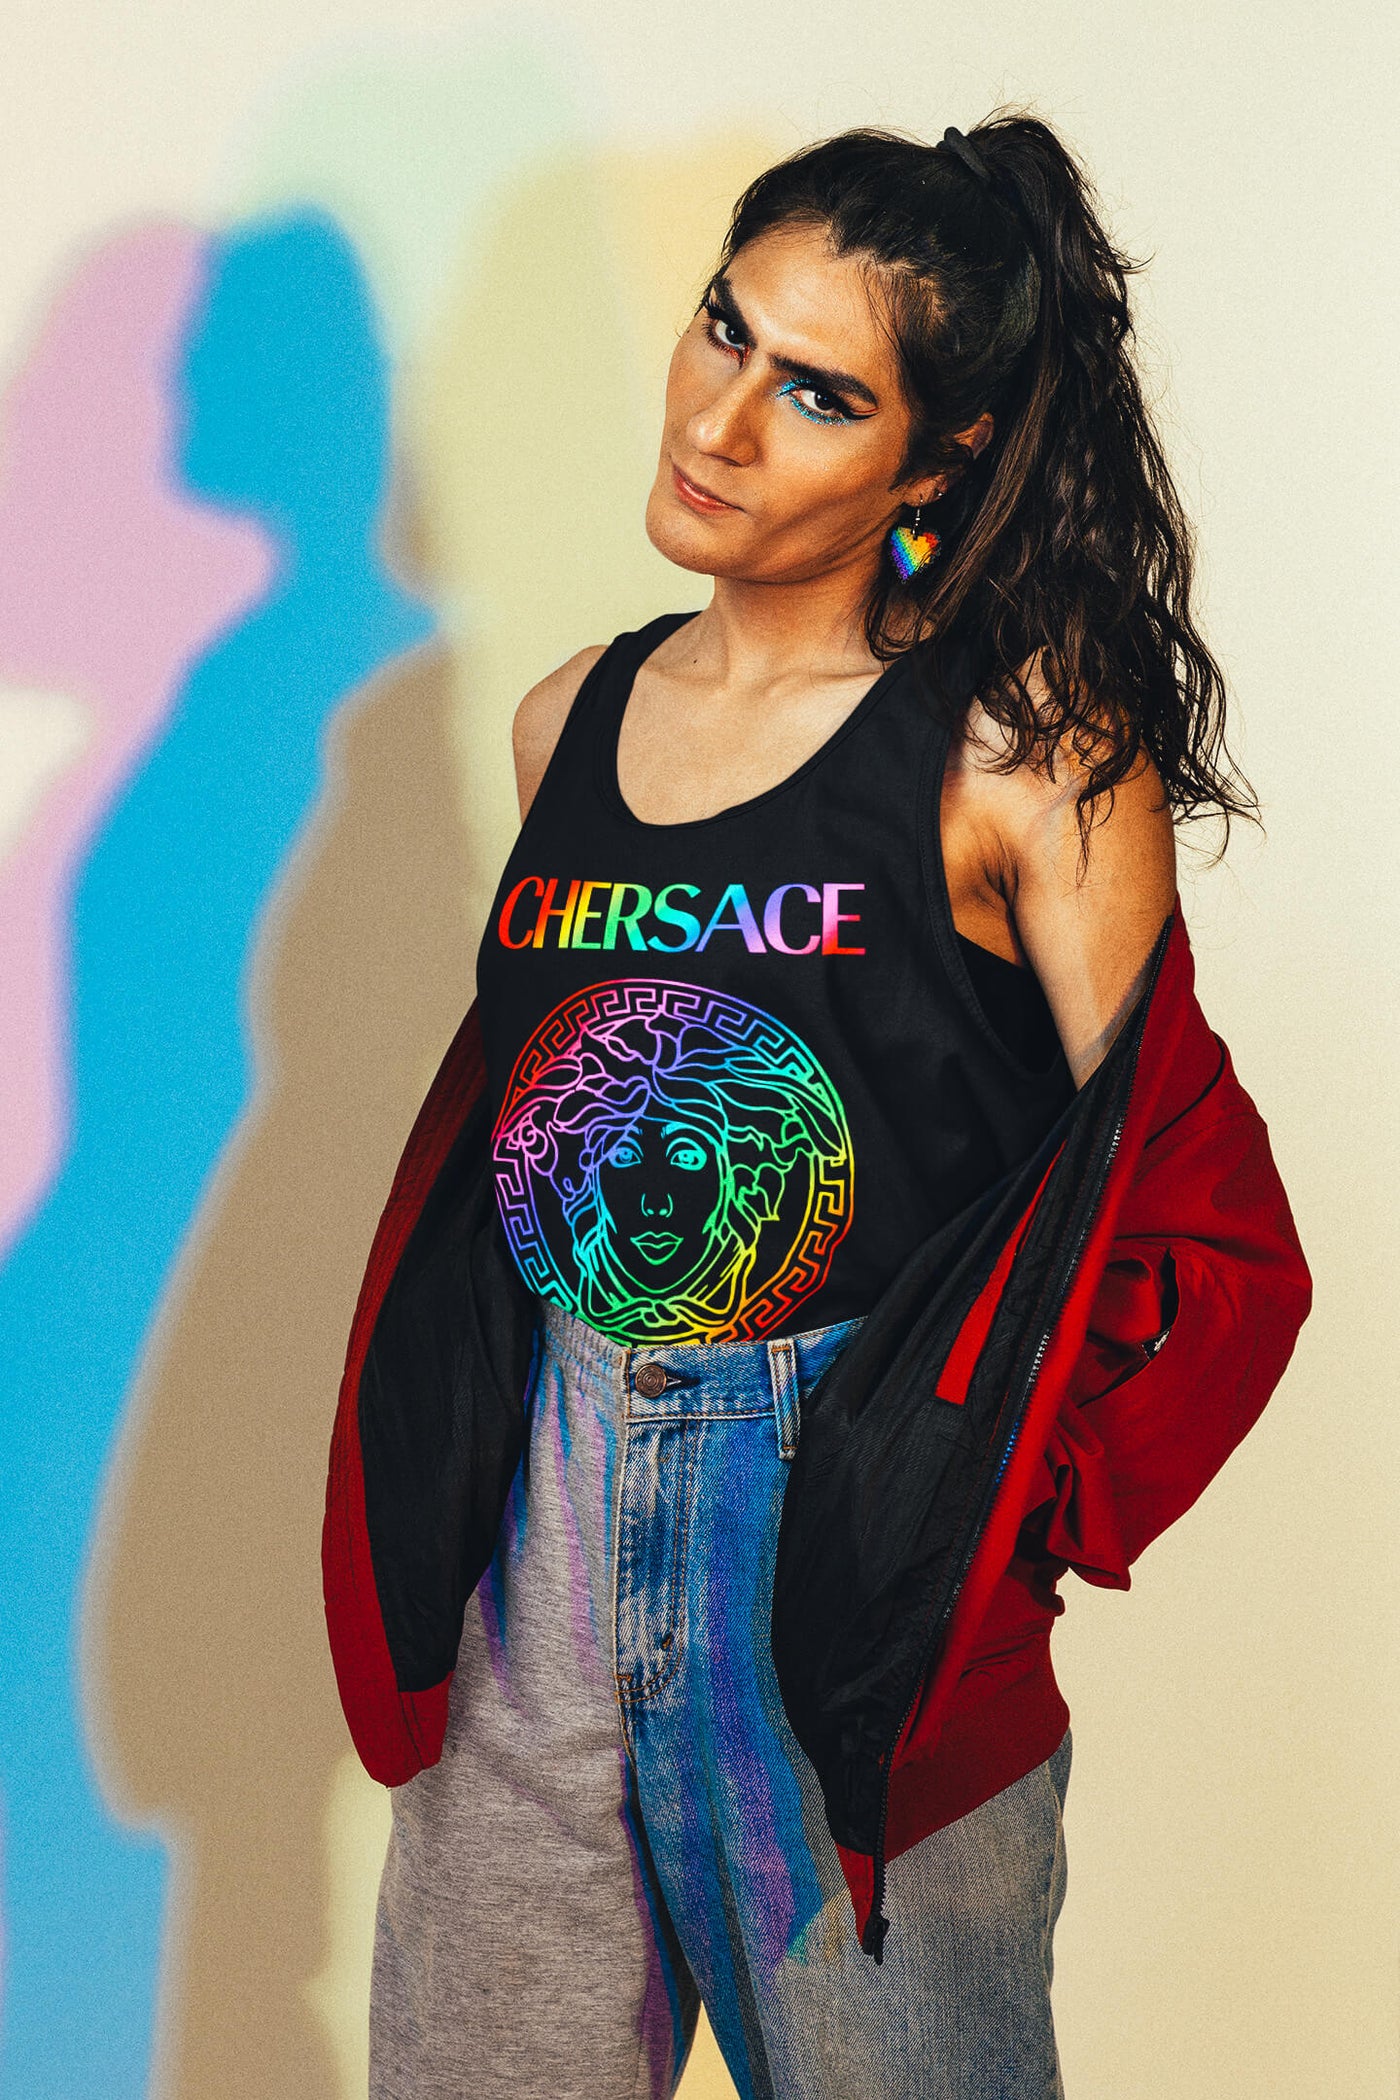 CHERSACE by Gllamazon scoop neck tank top featuring a trans woman wearing lgbt colored earrings